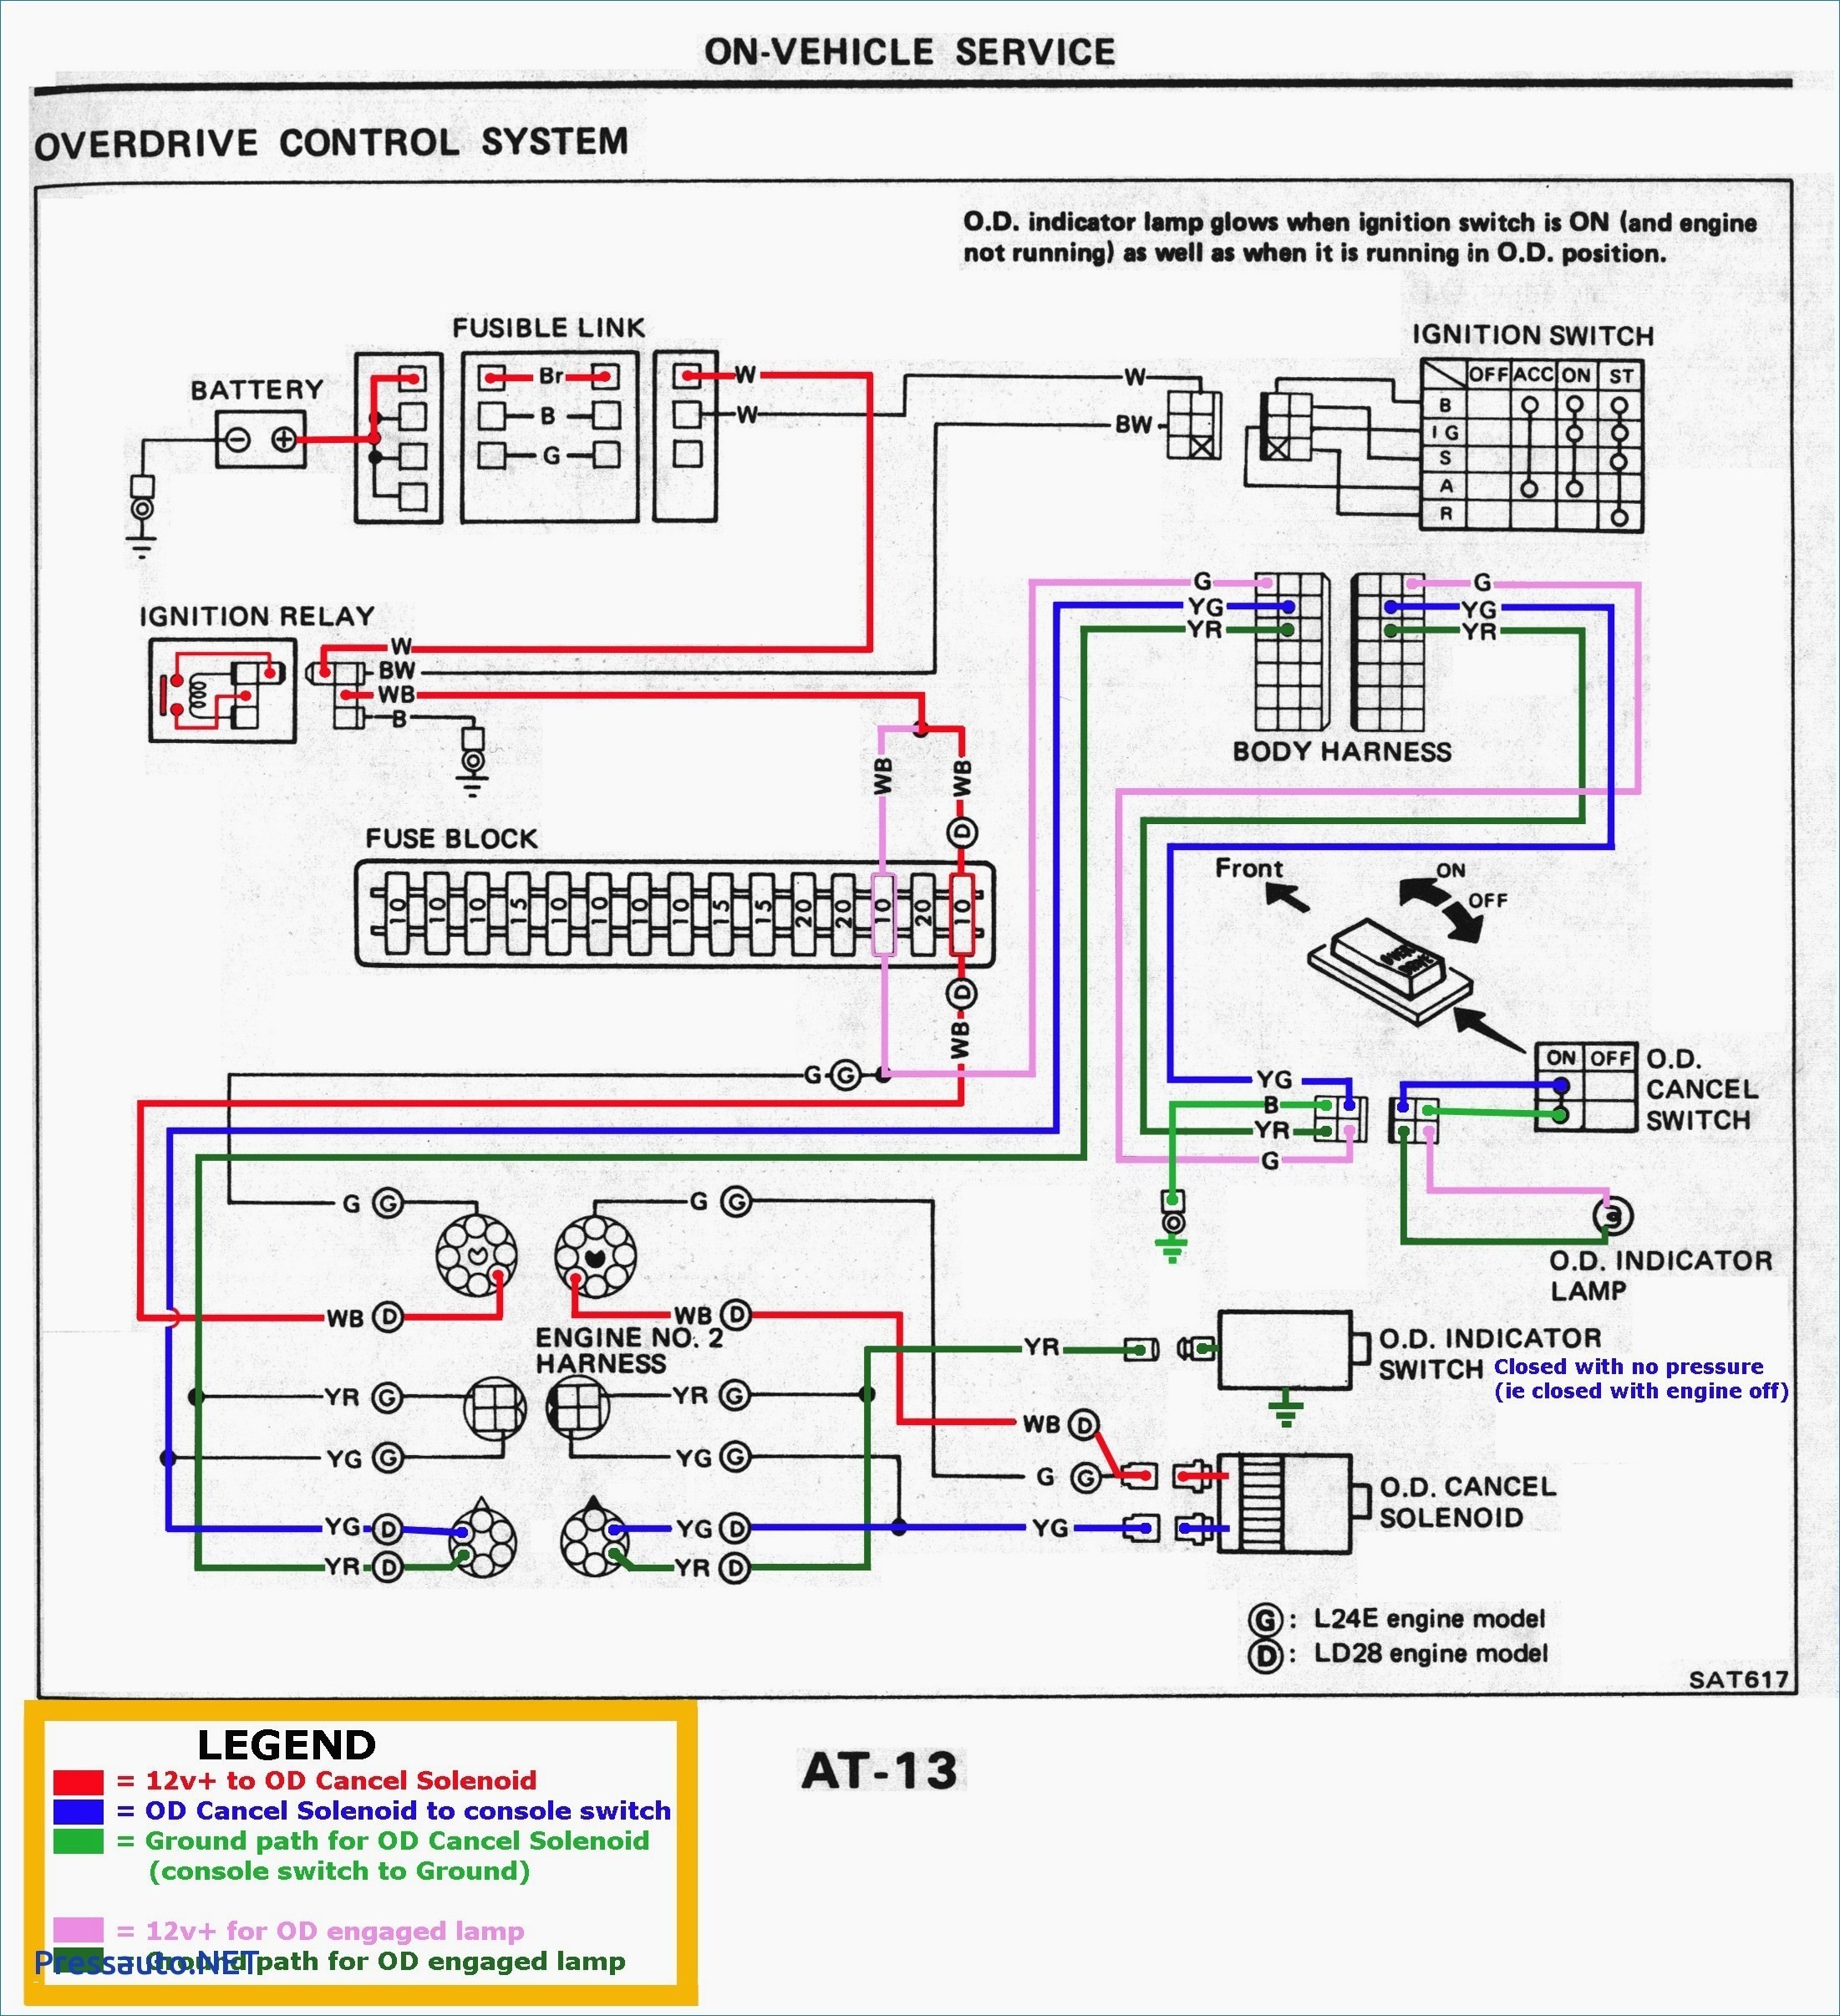 Wiring Diagram for Ip Camera New Bunker Hill Security Camera Wiring Diagram New Best How to